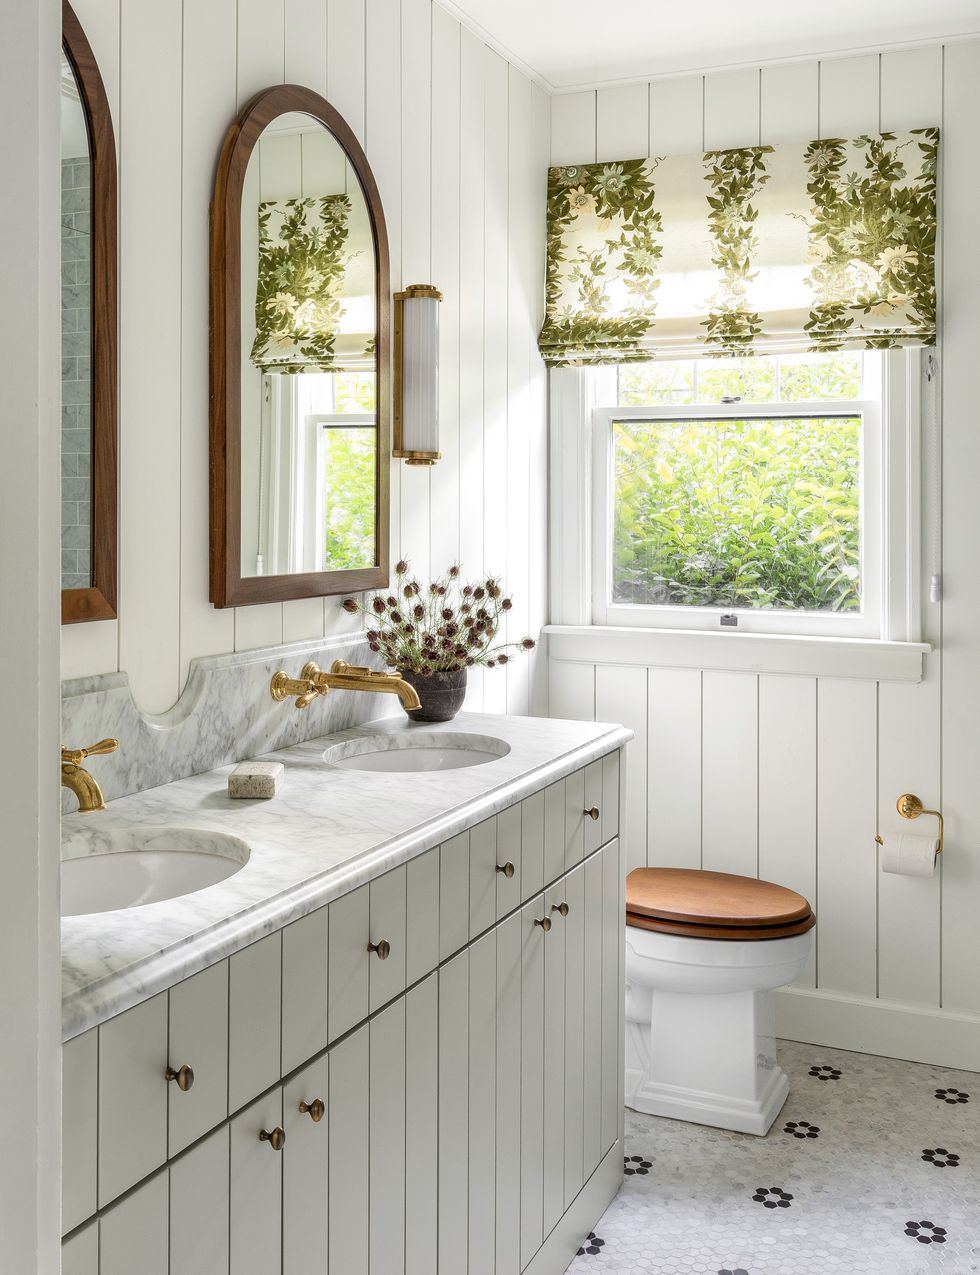 10 Decorative Designs For Your Small Bathroom